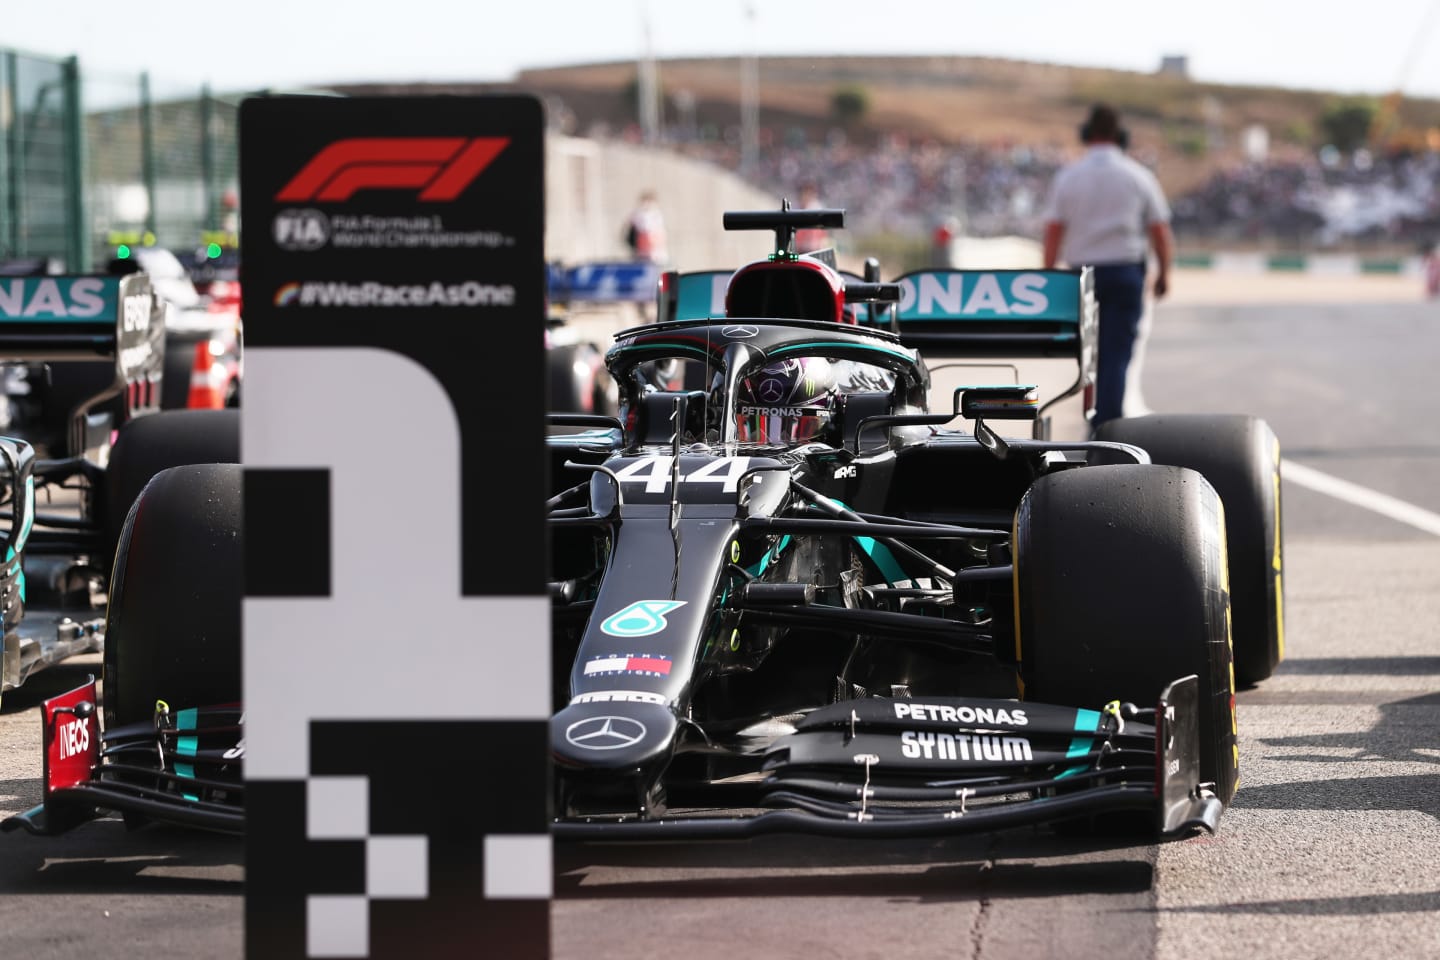 PORTIMAO, PORTUGAL - OCTOBER 24: Pole position qualifier Lewis Hamilton of Great Britain and